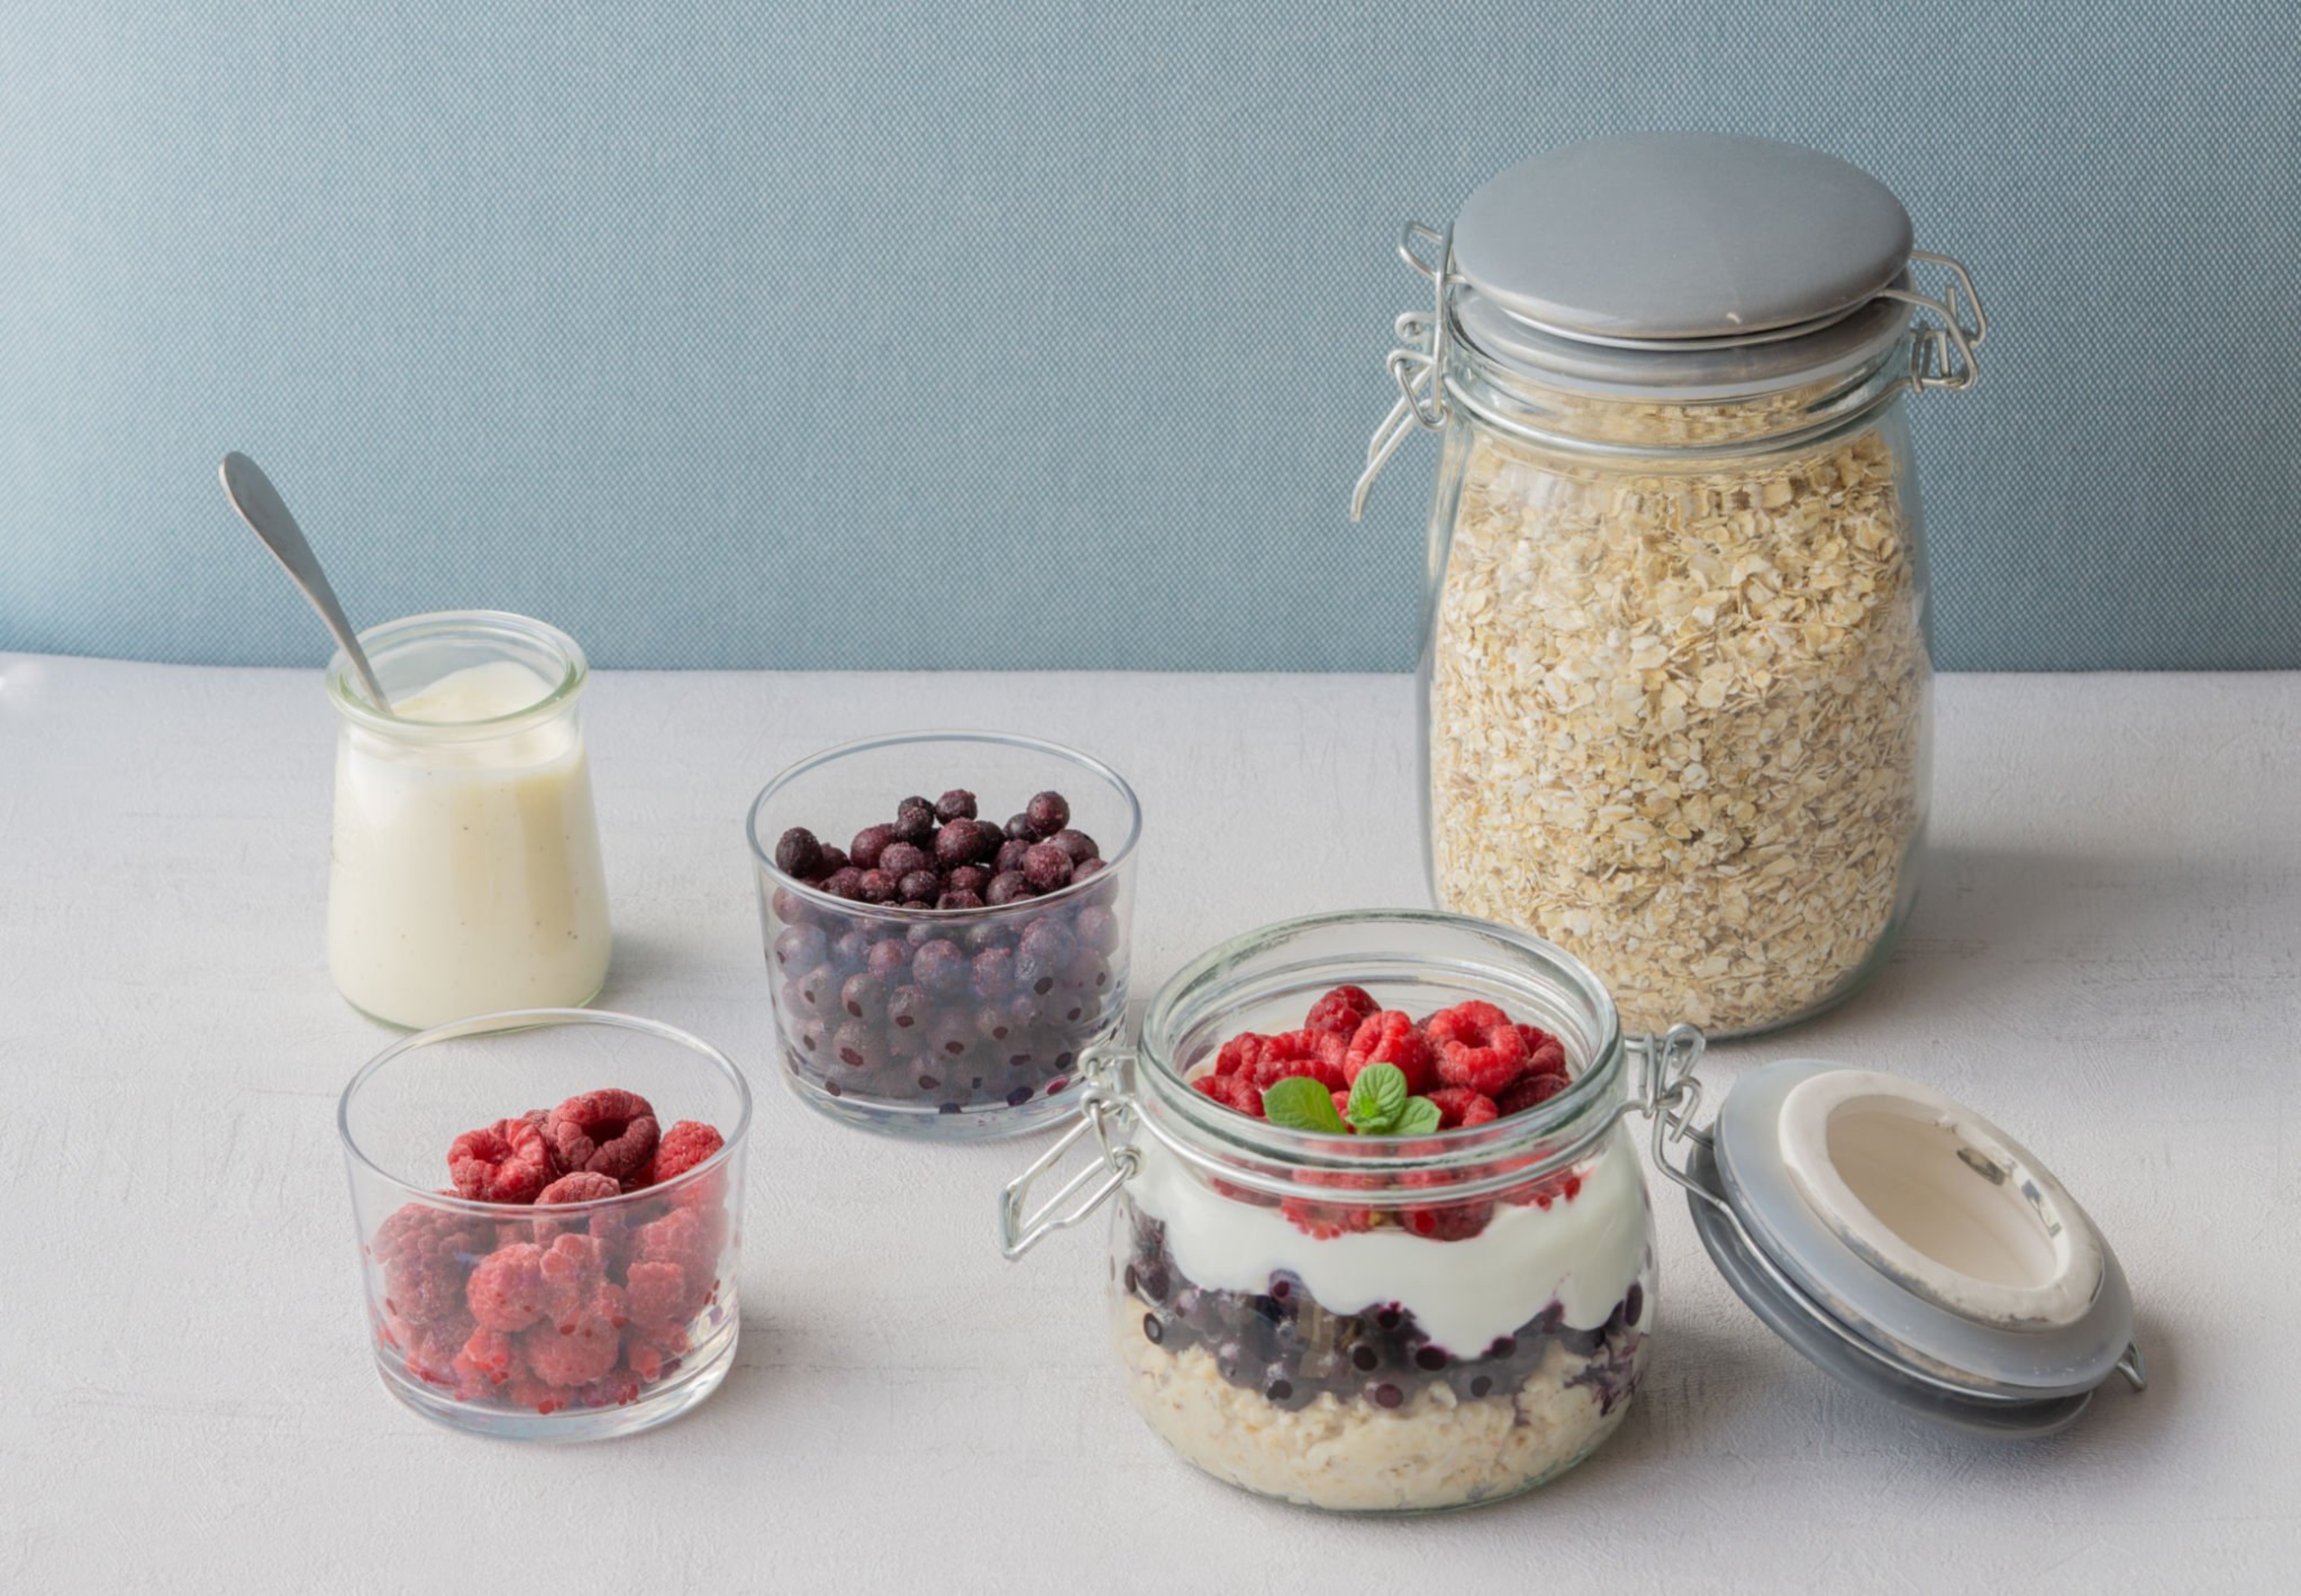 No Time for Breakfast? Try These Delicious Overnight Oats Recipes